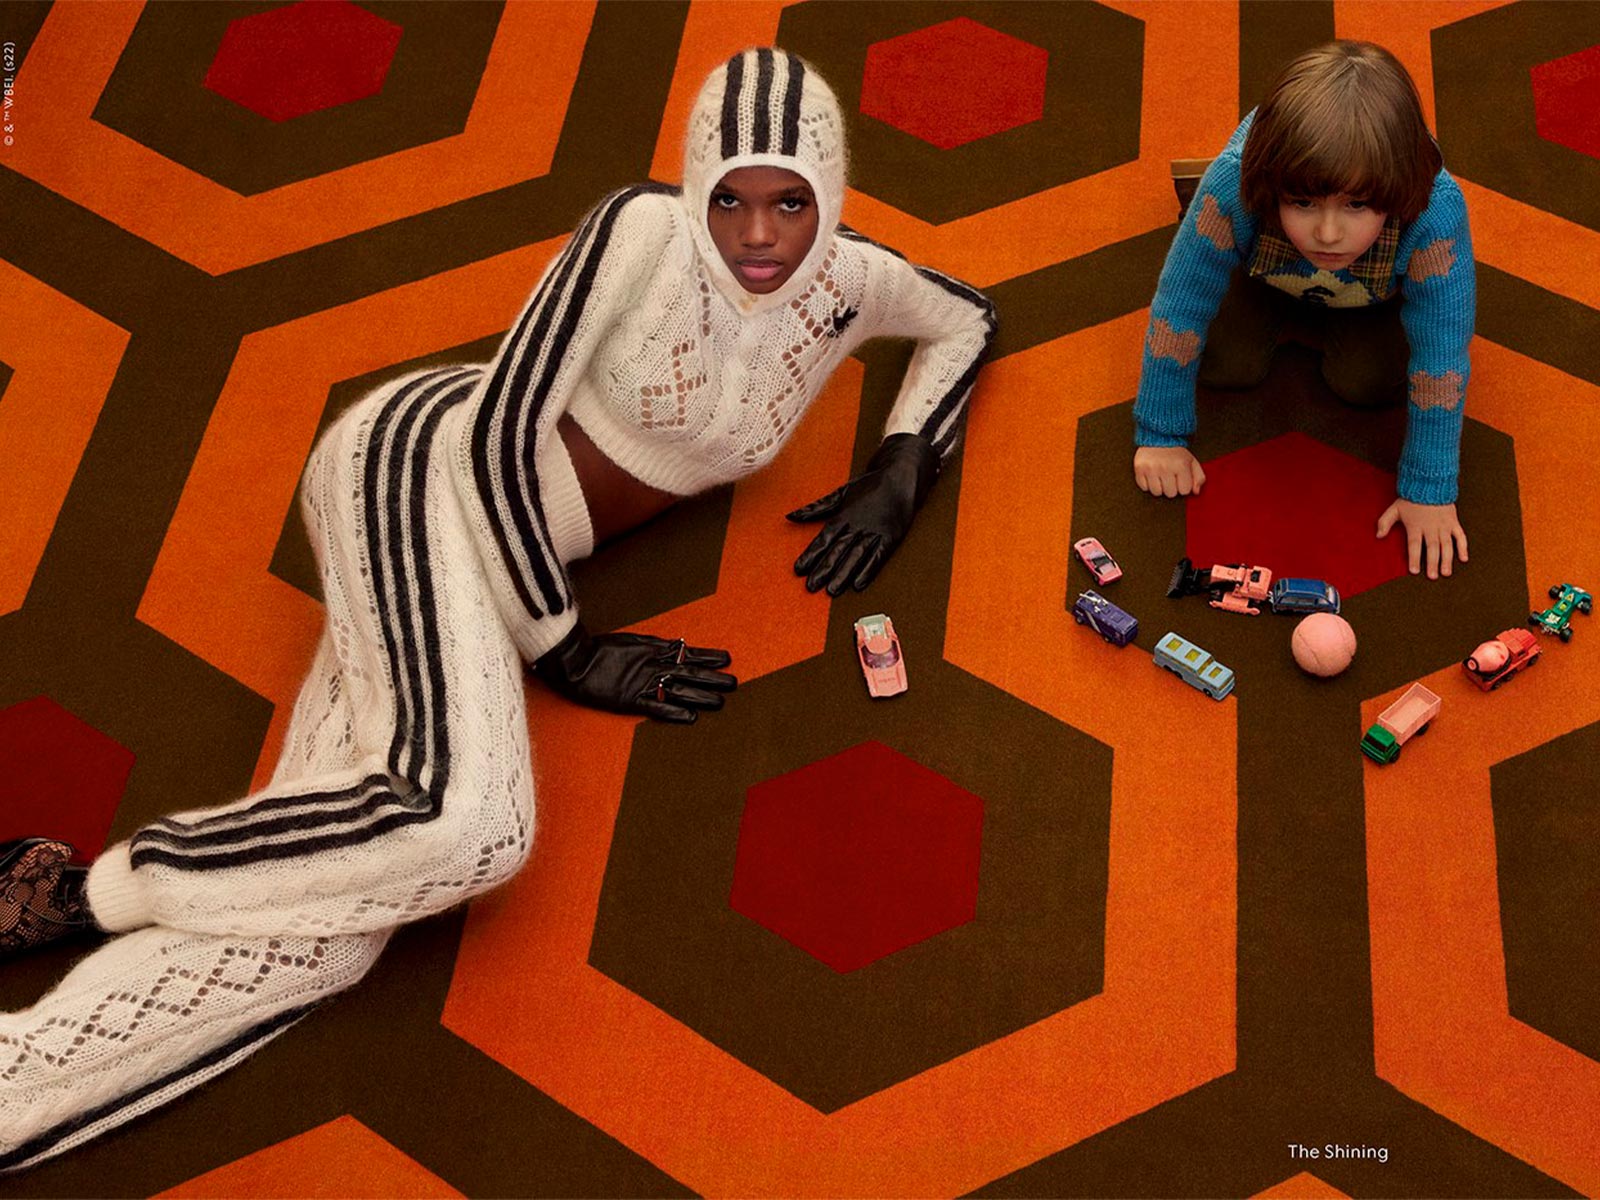 Gucci celebrates Stanley Kubrick’s legacy in latest campaign